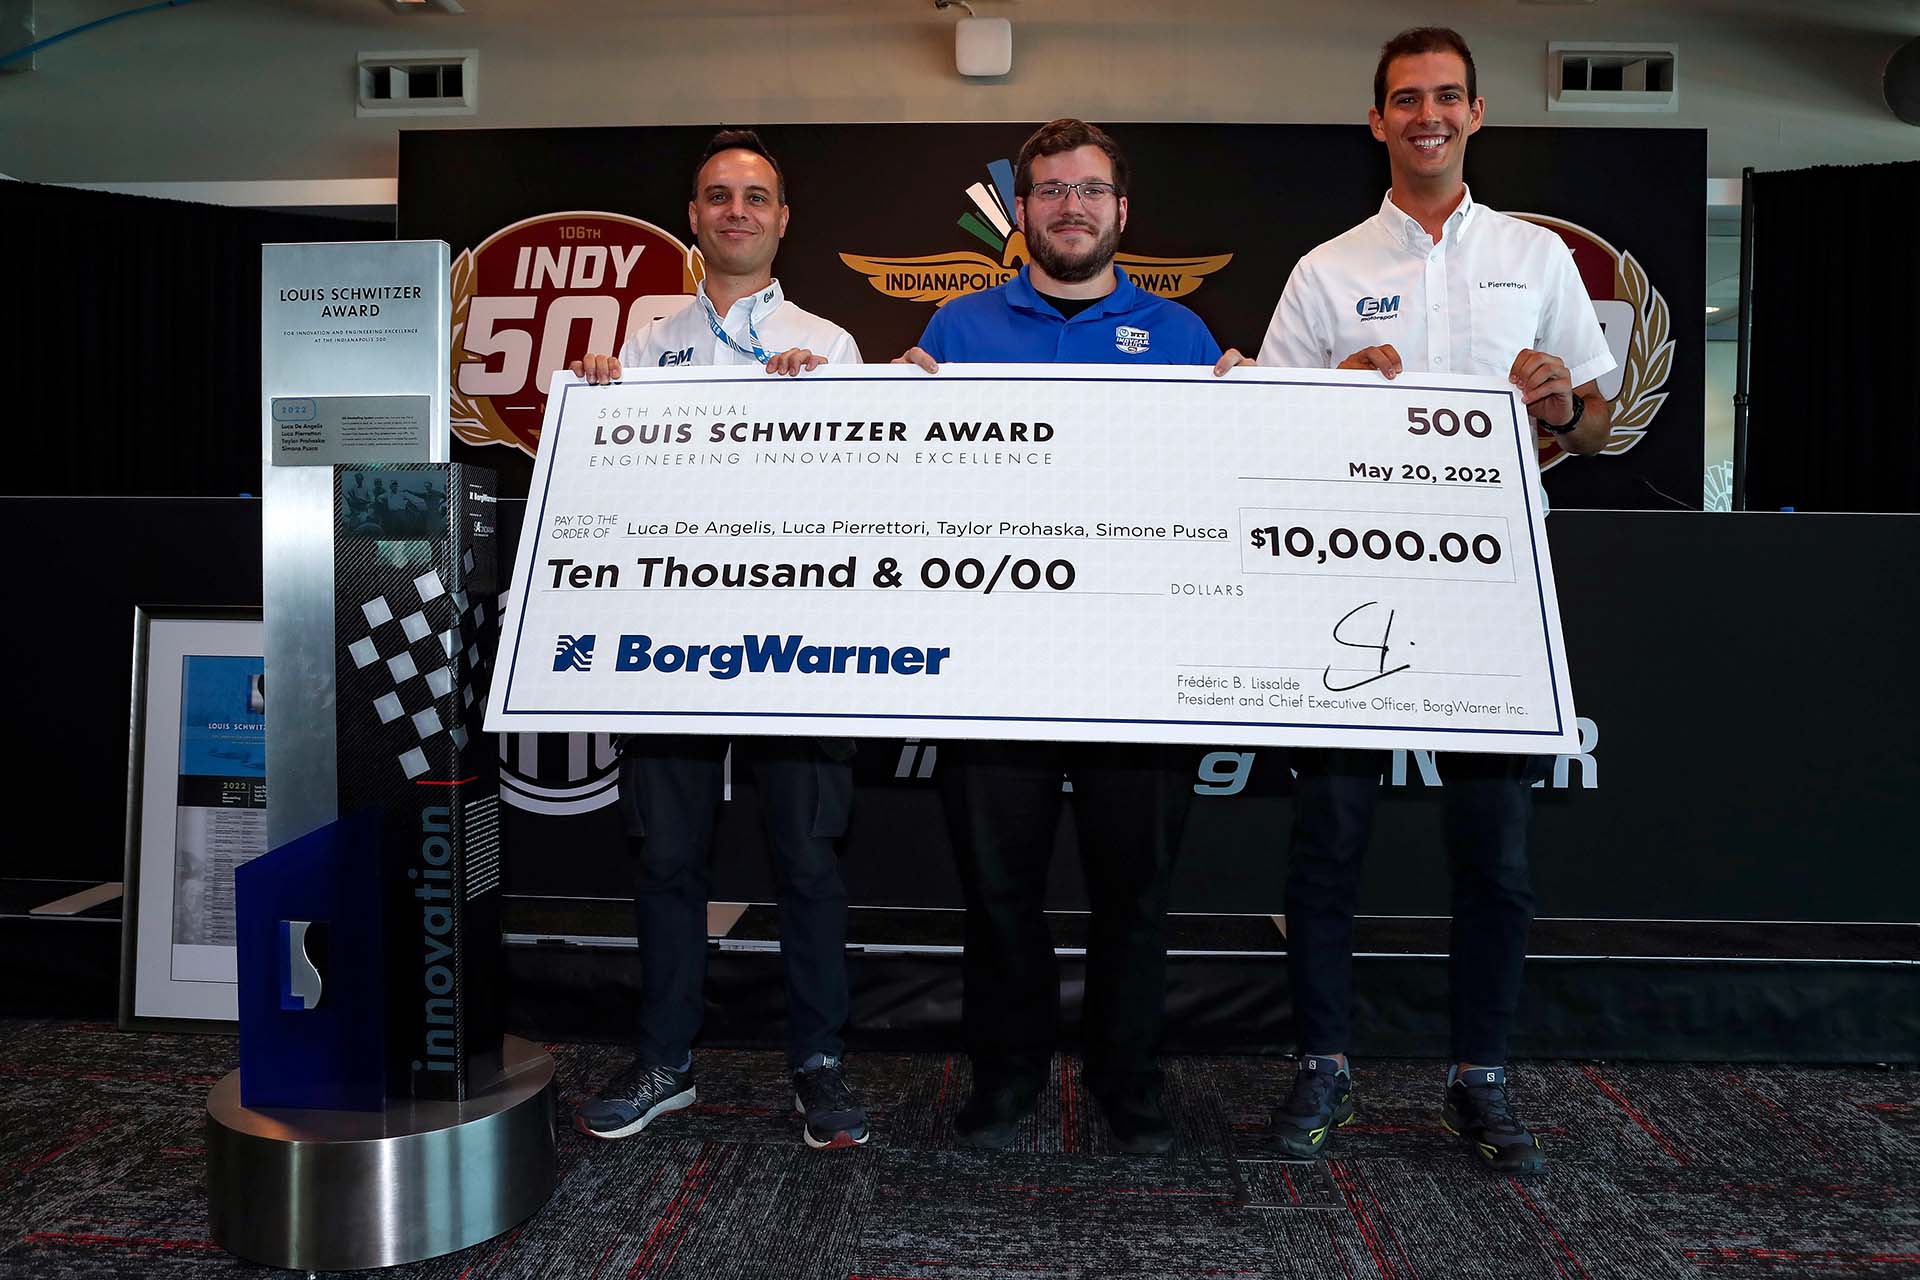 Three men hold large check for 10,000 USD